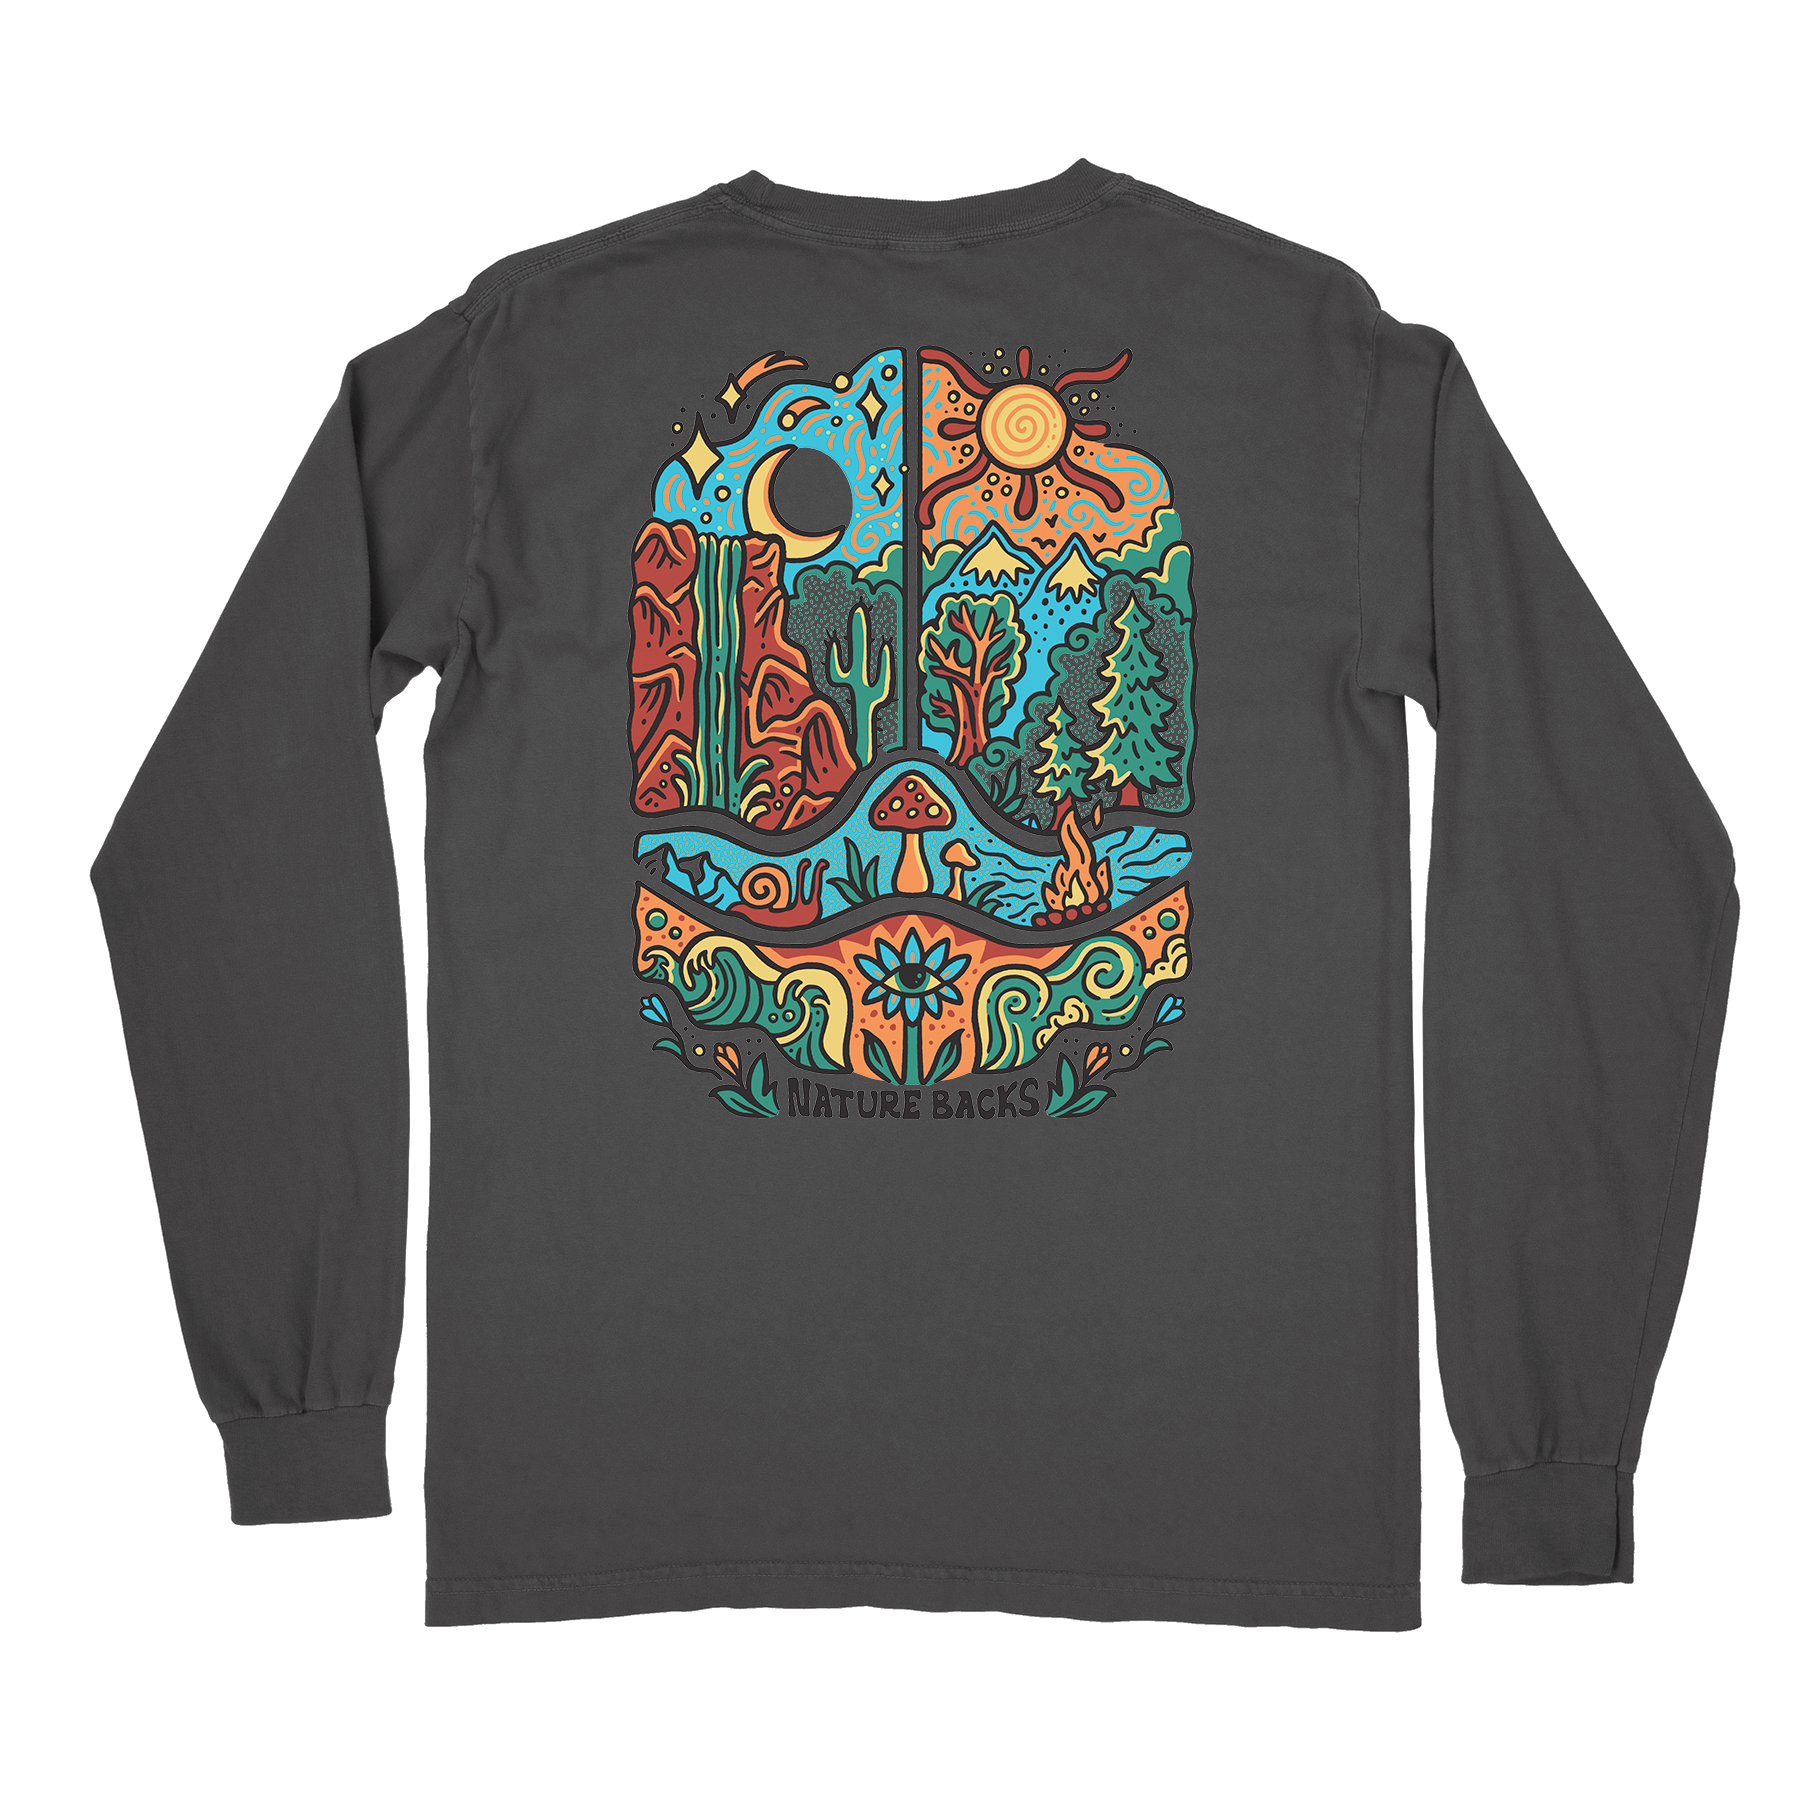 Nature Backs Comfort Colors Enchanted Charcoal Long Sleeve T-Shirt | Nature-Inspired Design on Ultra-Soft Fabric